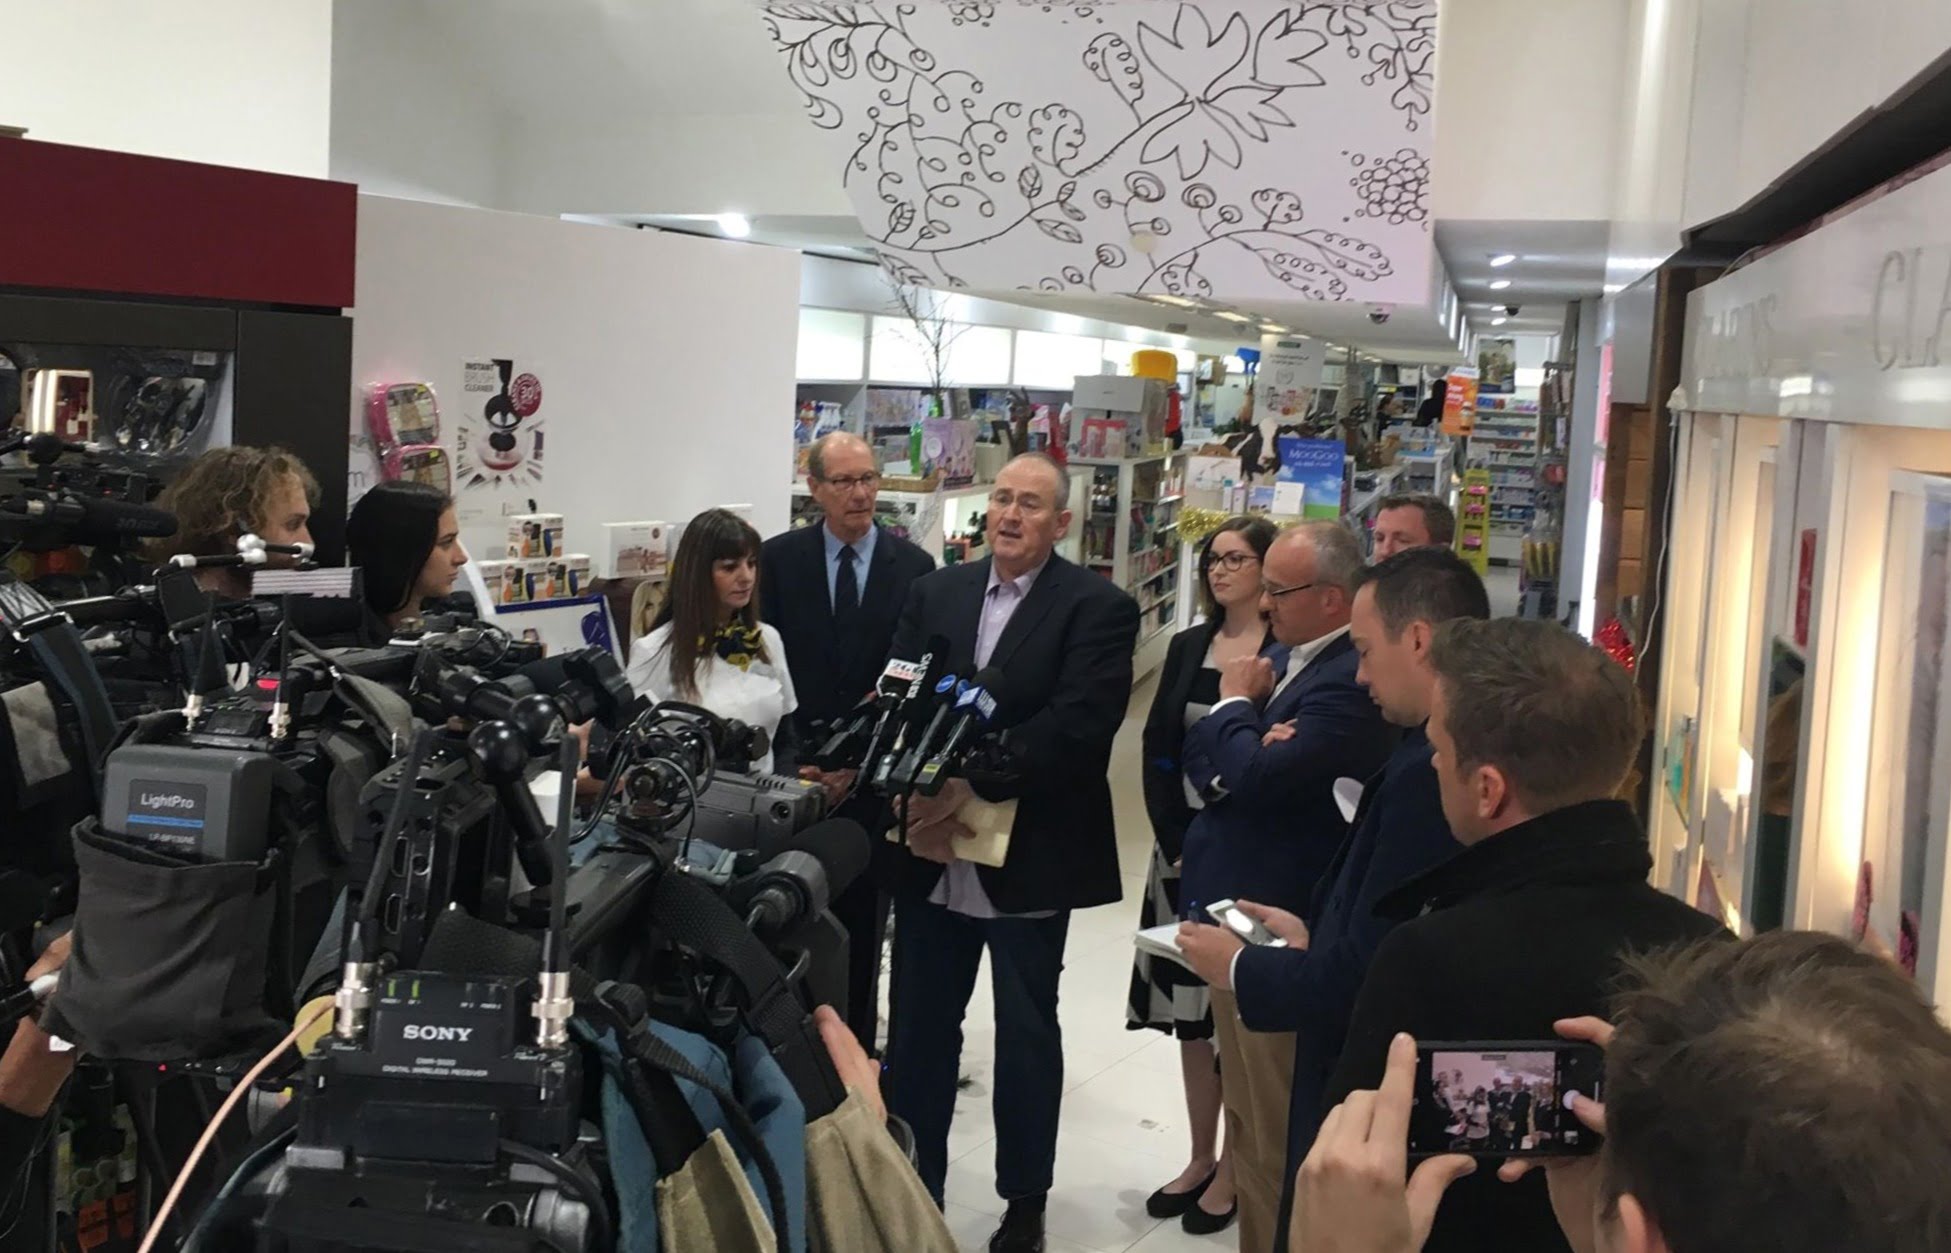 Shadow Health Minister Walt Secord makes the announcement at Adore Compounding Pharmacy in Rozelle, NSW.